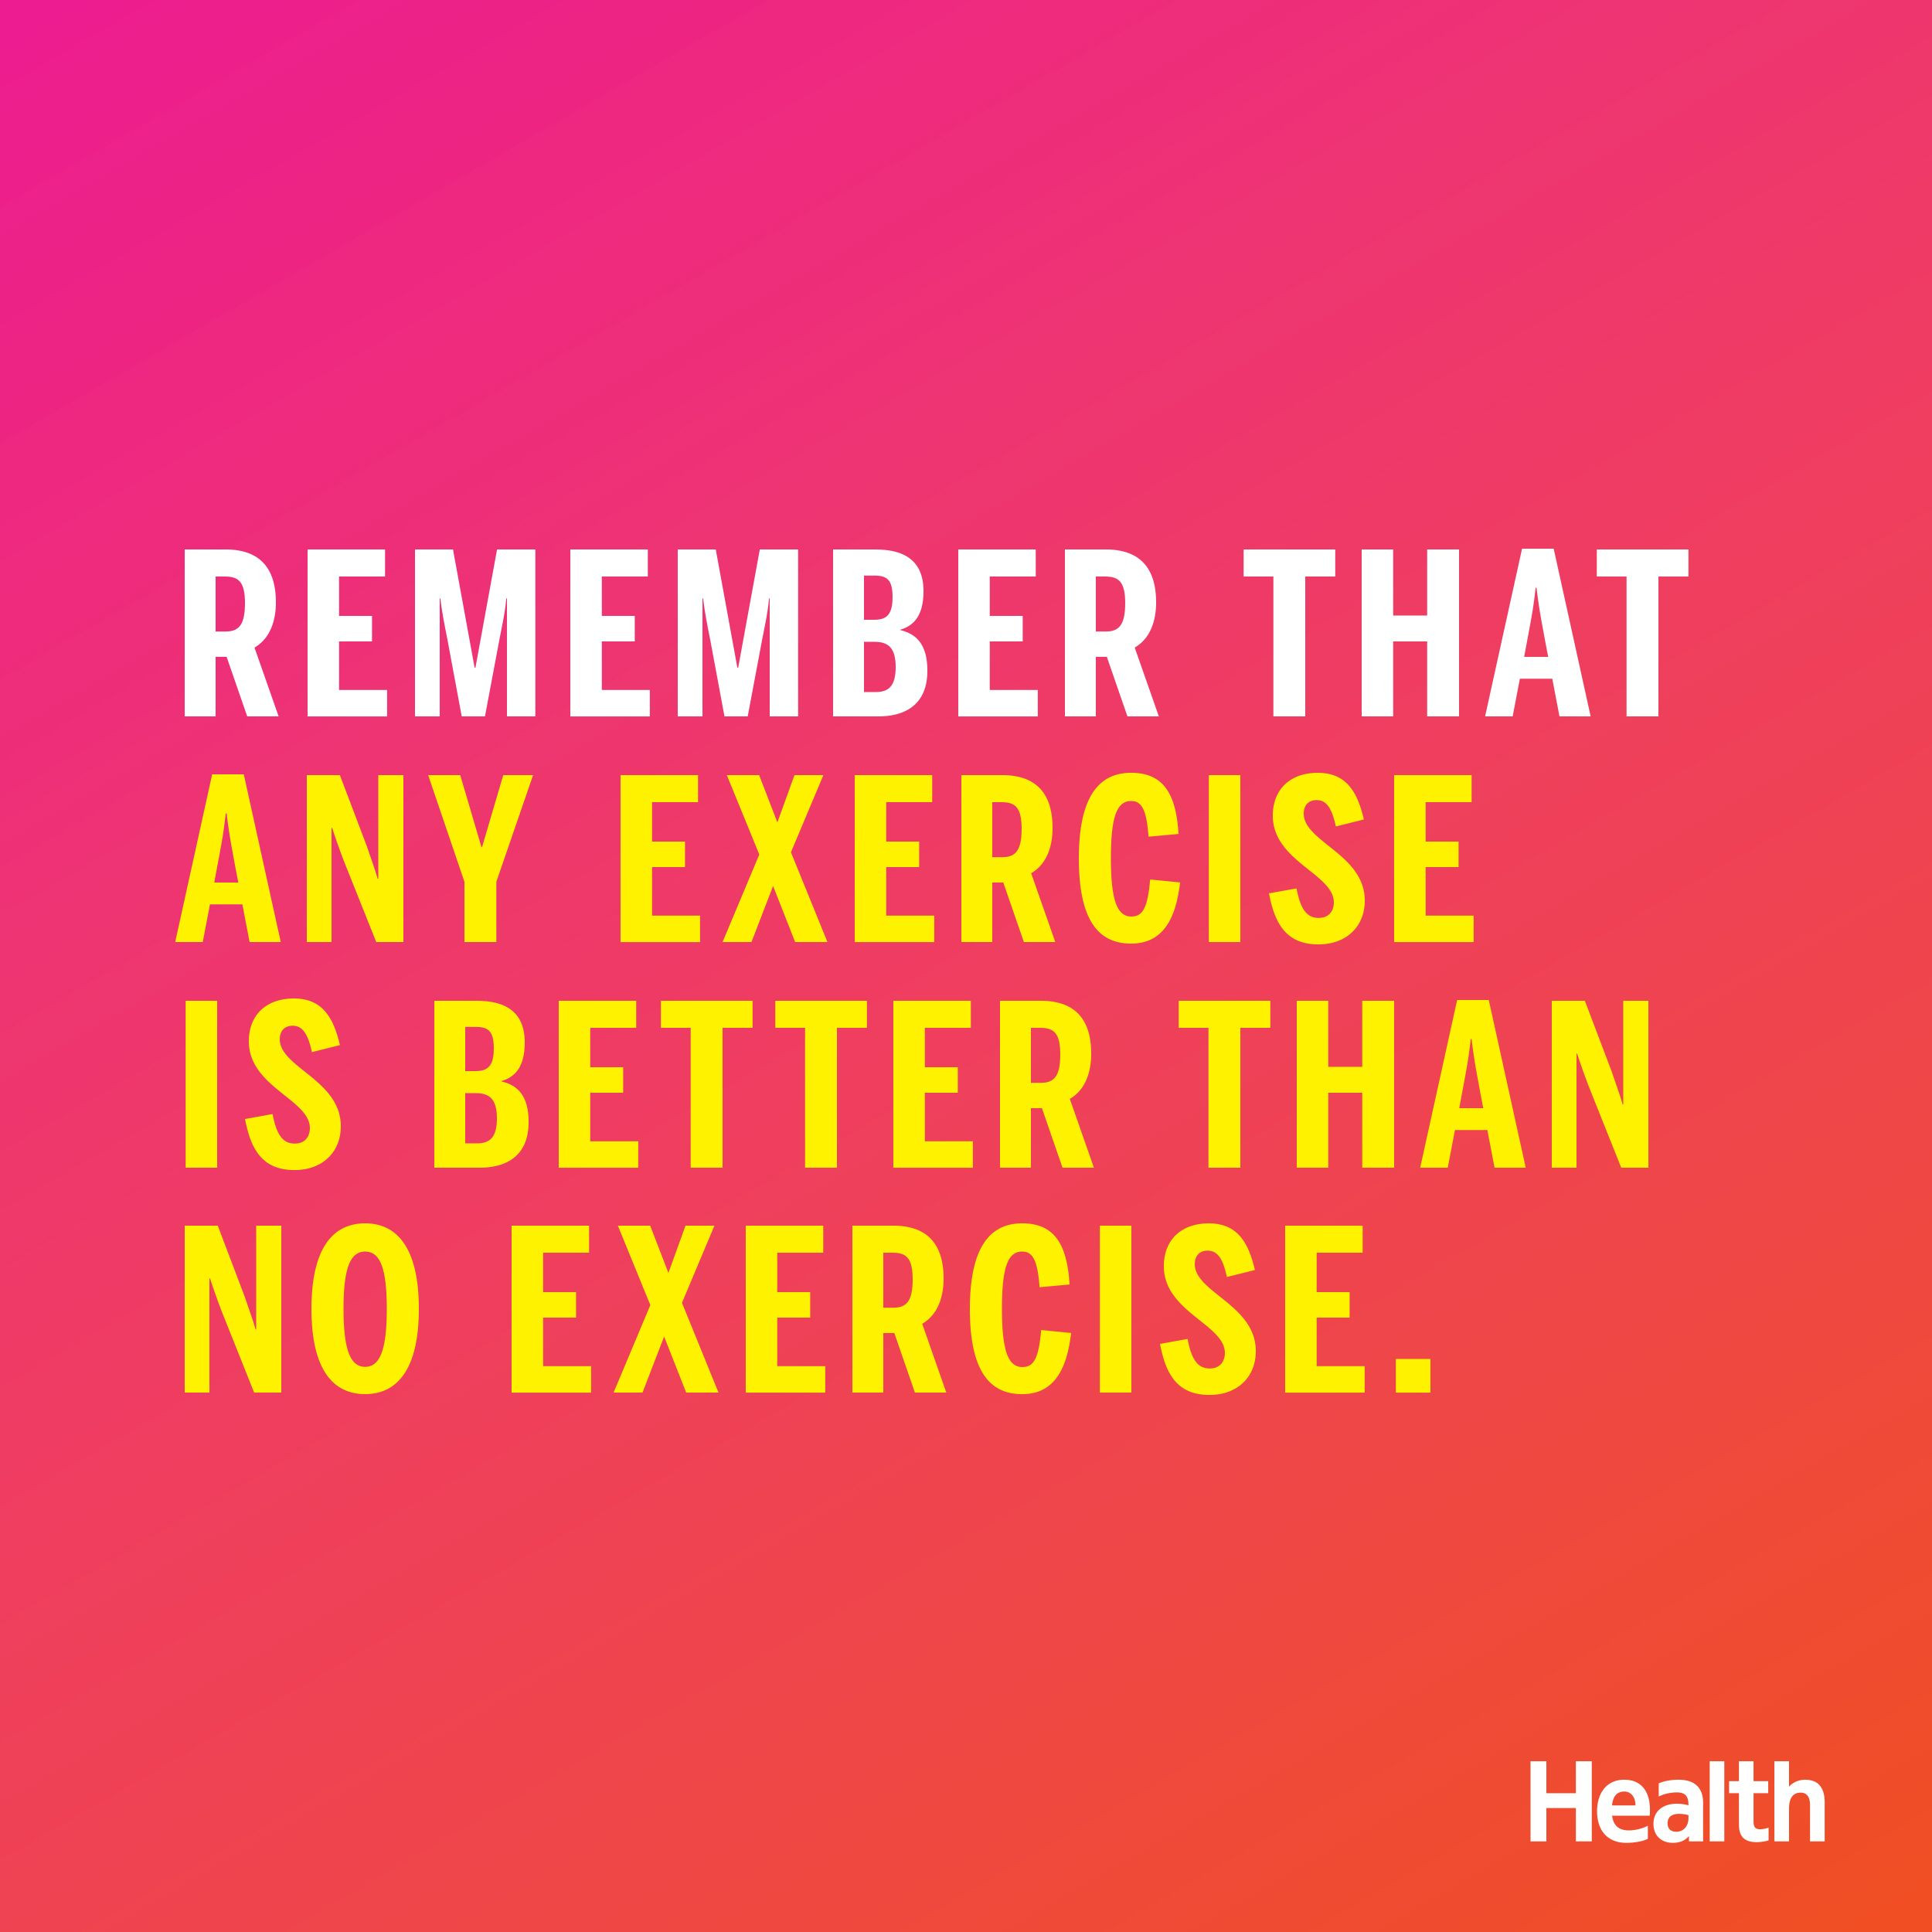 Motivational Health Quote
 24 Motivational Quotes